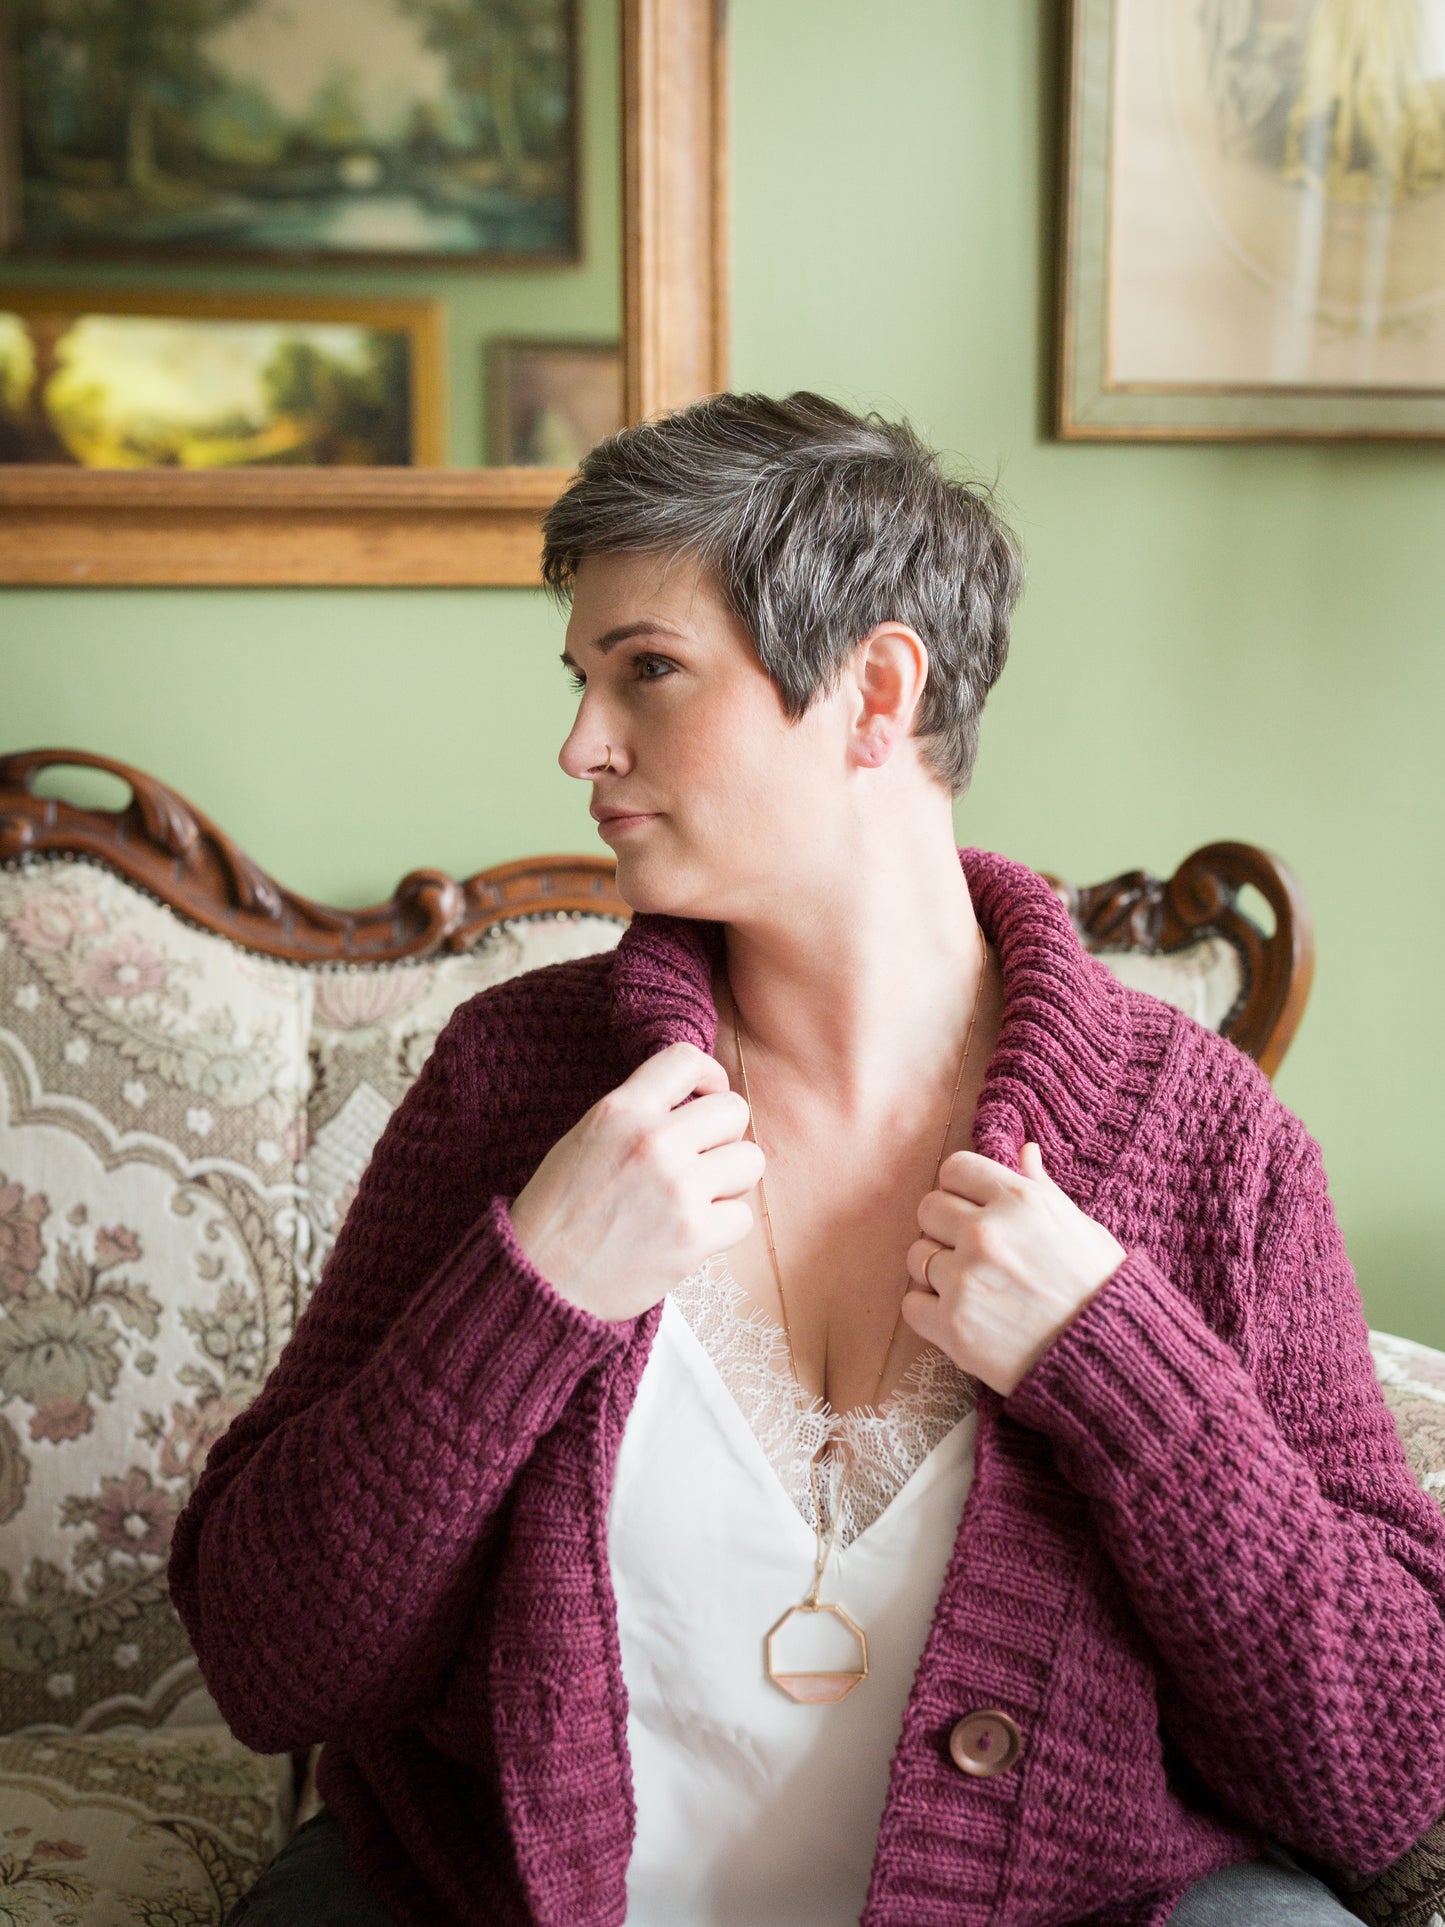 Jen sits in front of the camera, looking to the side. Over a white camisole, she wears a hand knit burgundy cardigan. She adjusts the thick cowl neck, showing off the ribbing detail.